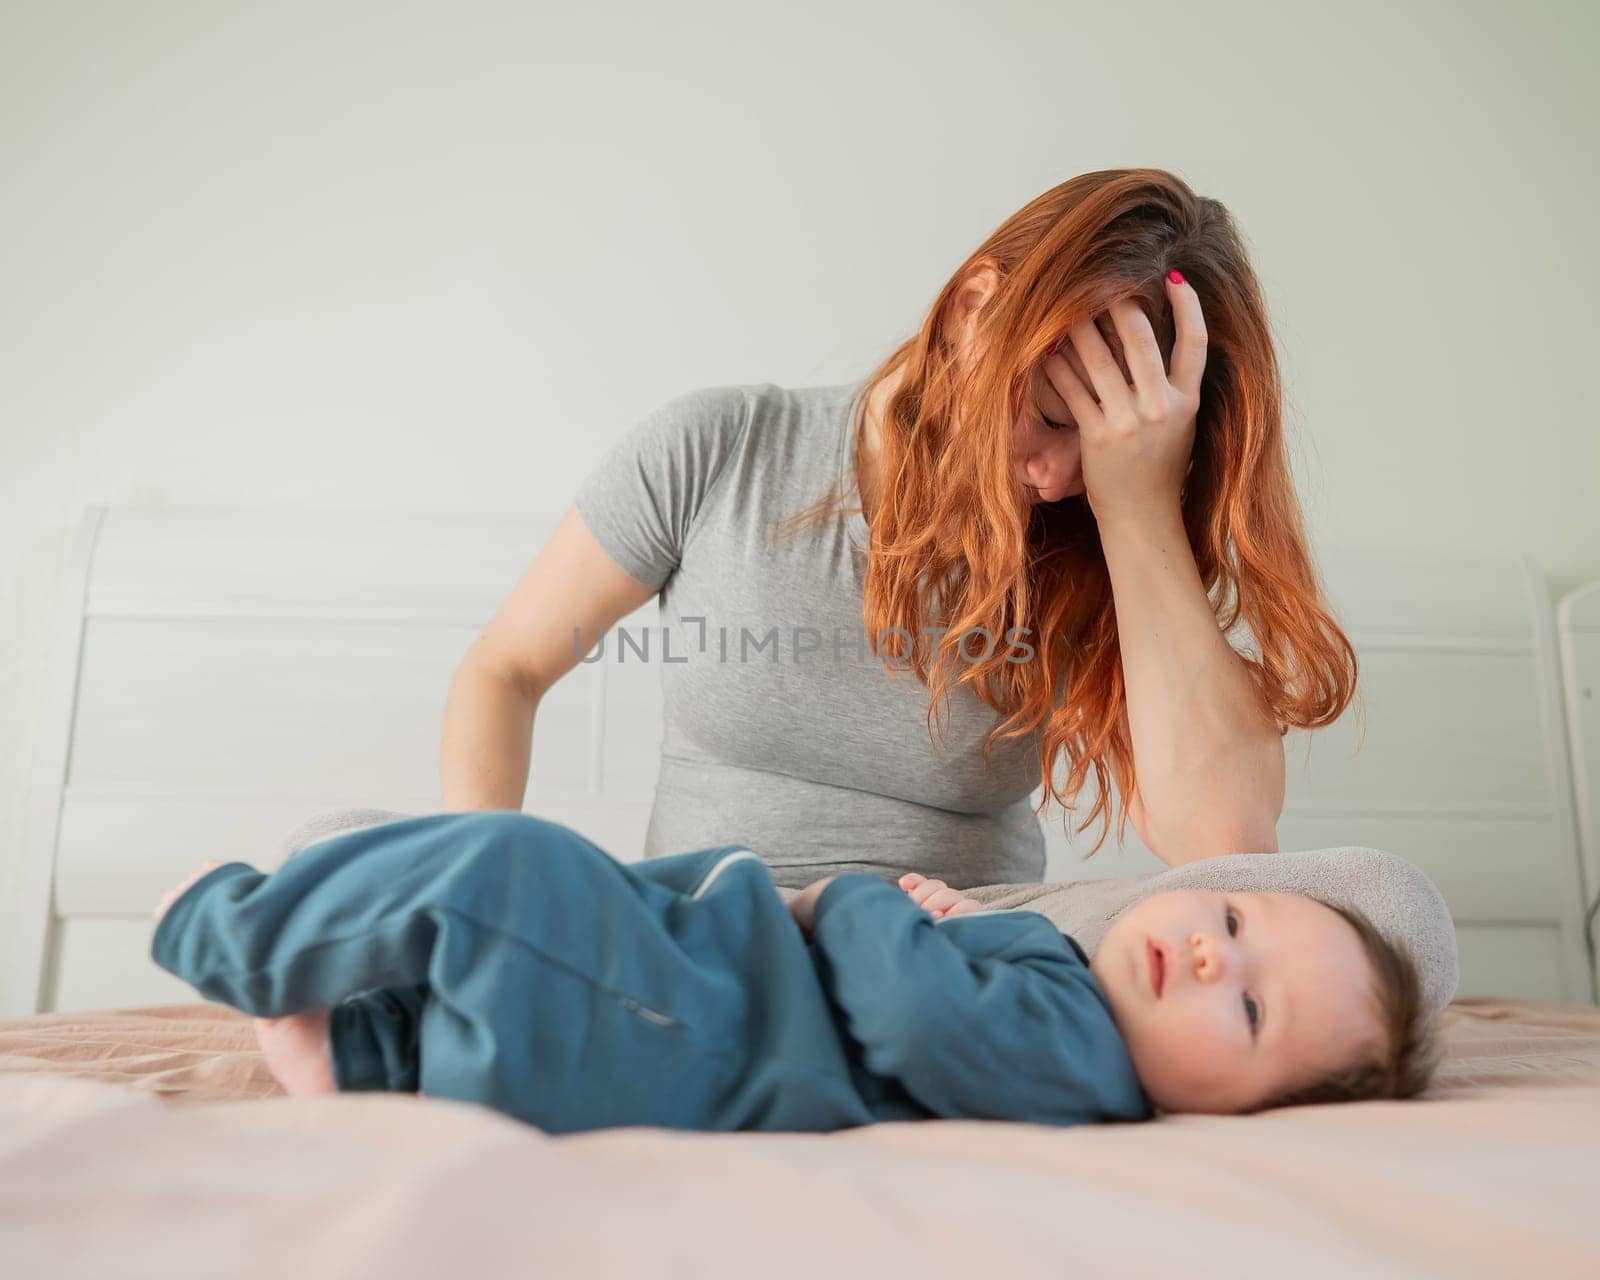 A woman sits on her child's bed and cries. Postpartum depression. by mrwed54